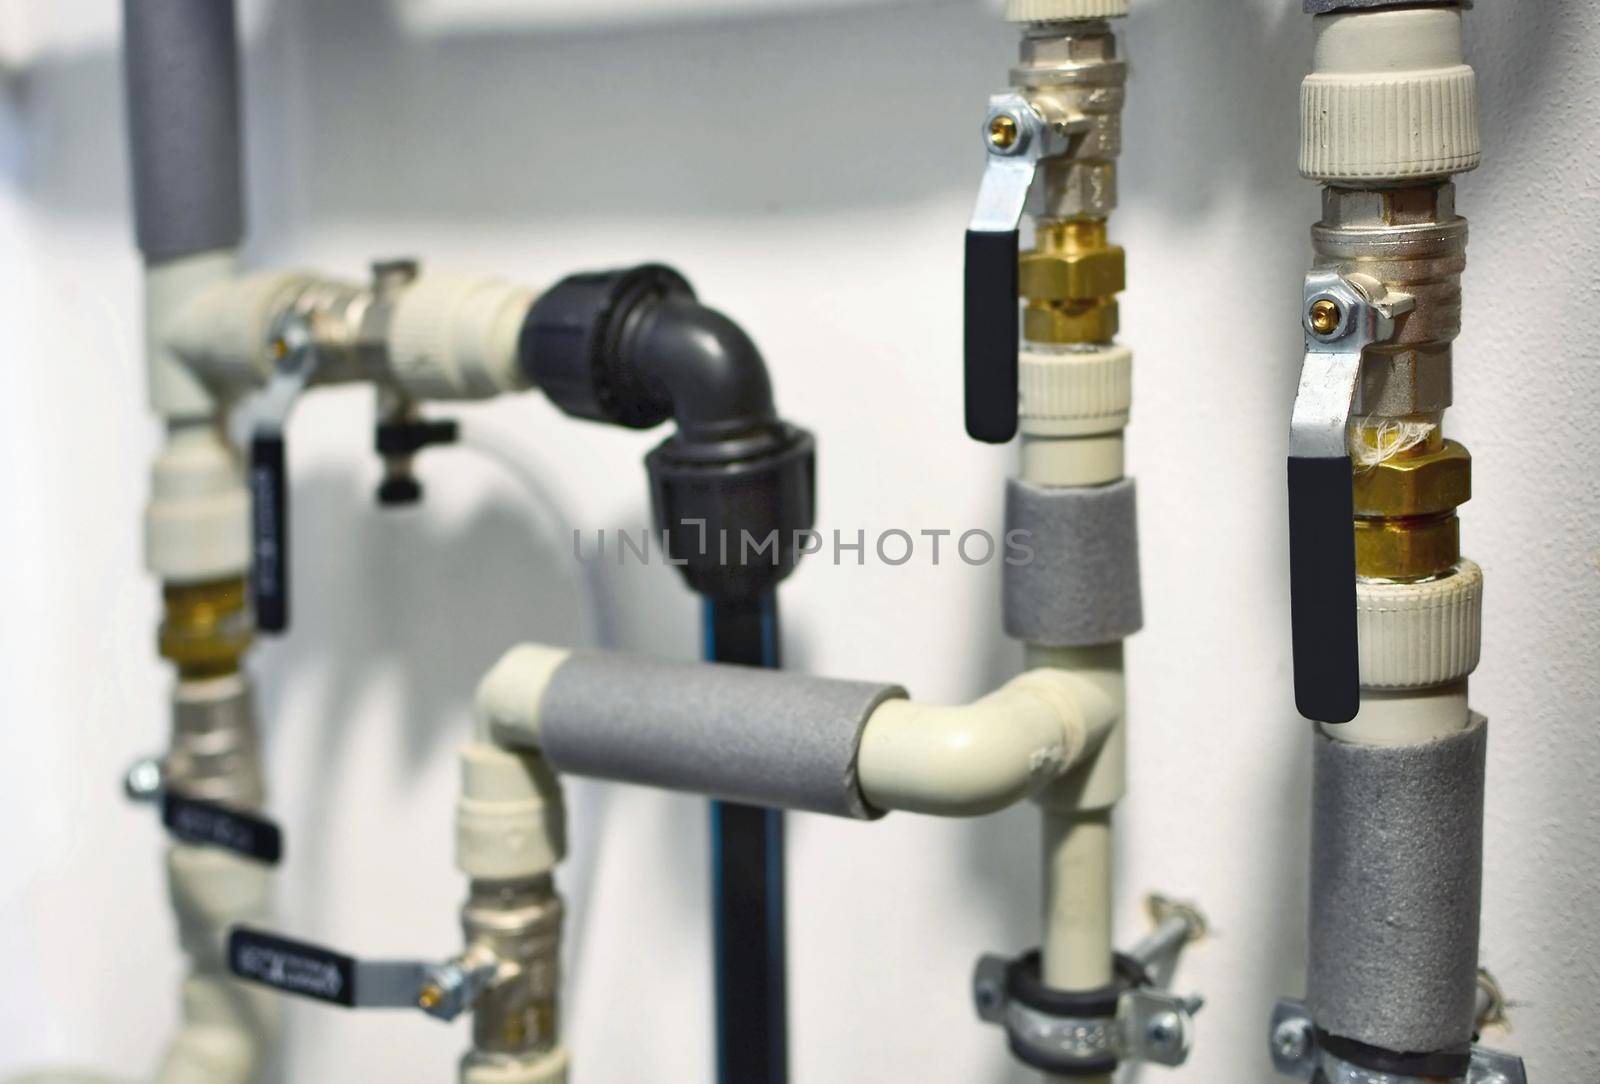 Closeup of an interior home plastic water piping with water shuts and valves on. Water pipes. Main water distribution in the home.